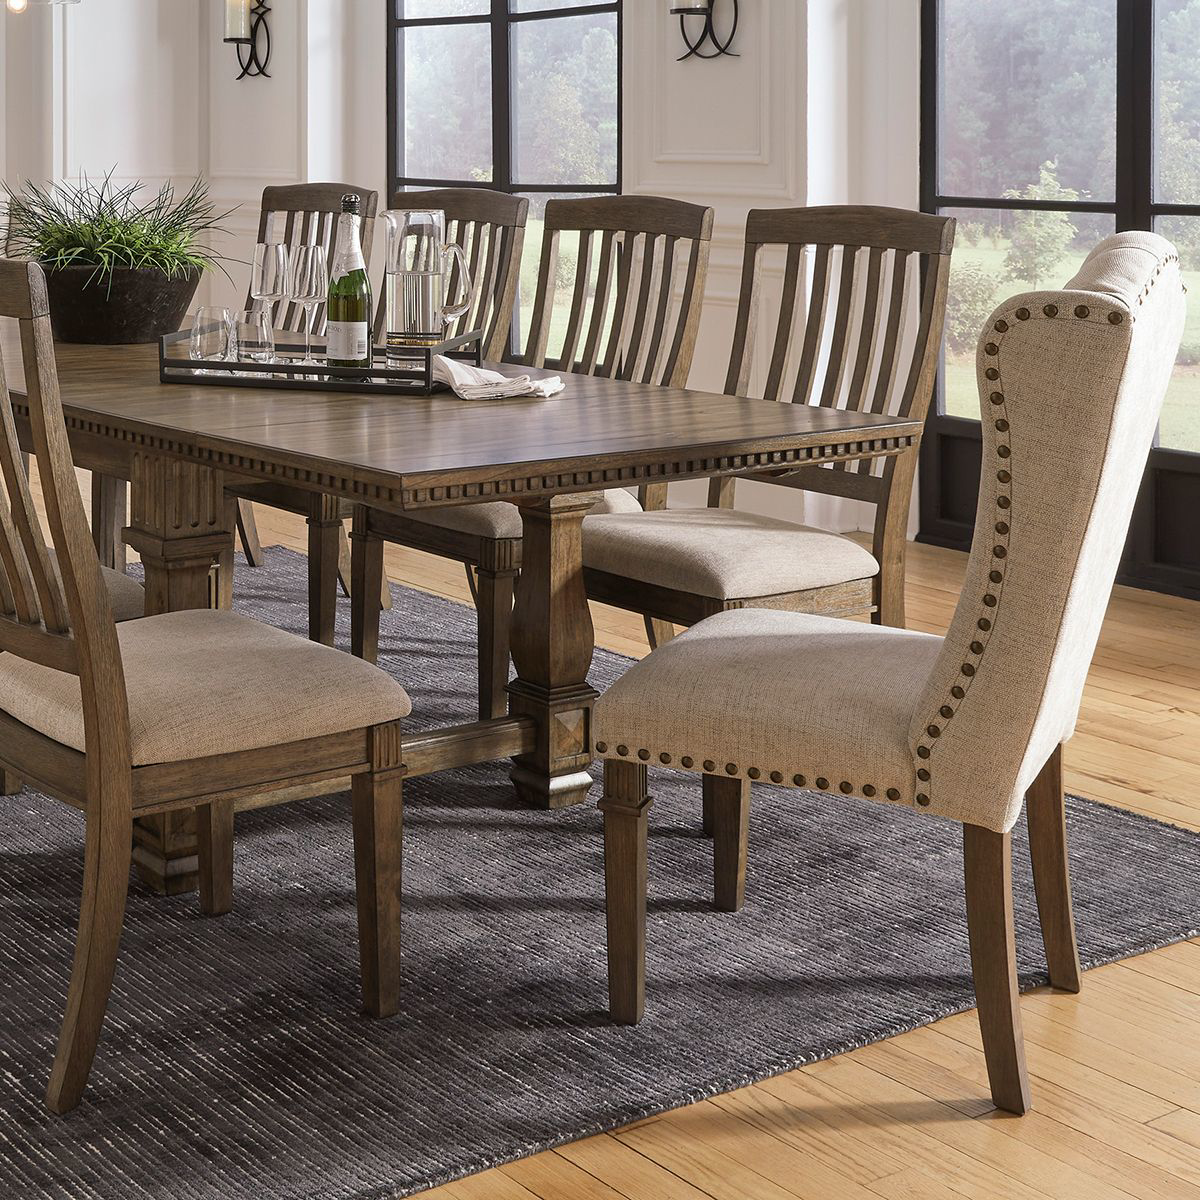 Picture of CORTE MADERA UPH DINING CHAIR